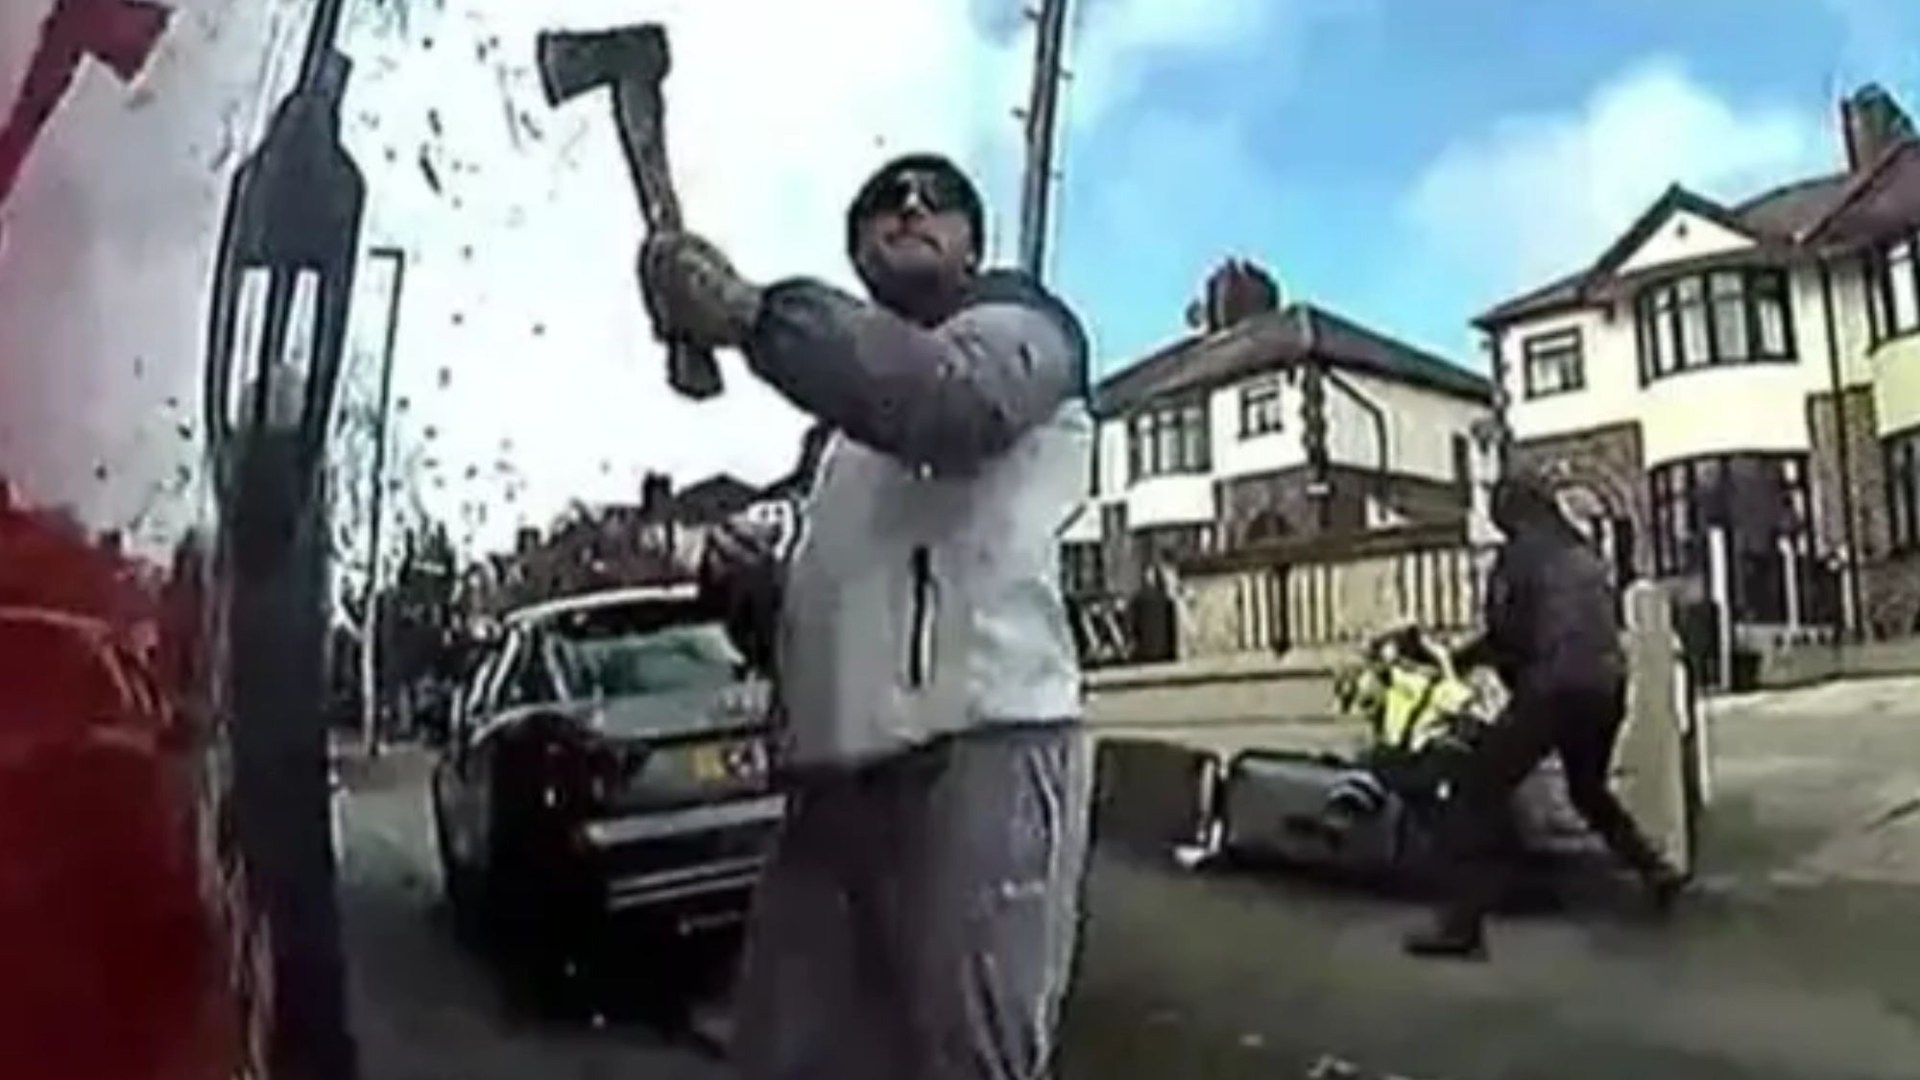 Horrifying moment hammer-wielding thugs violently attack bin men before flinging stop sign at vehicle as workers flee